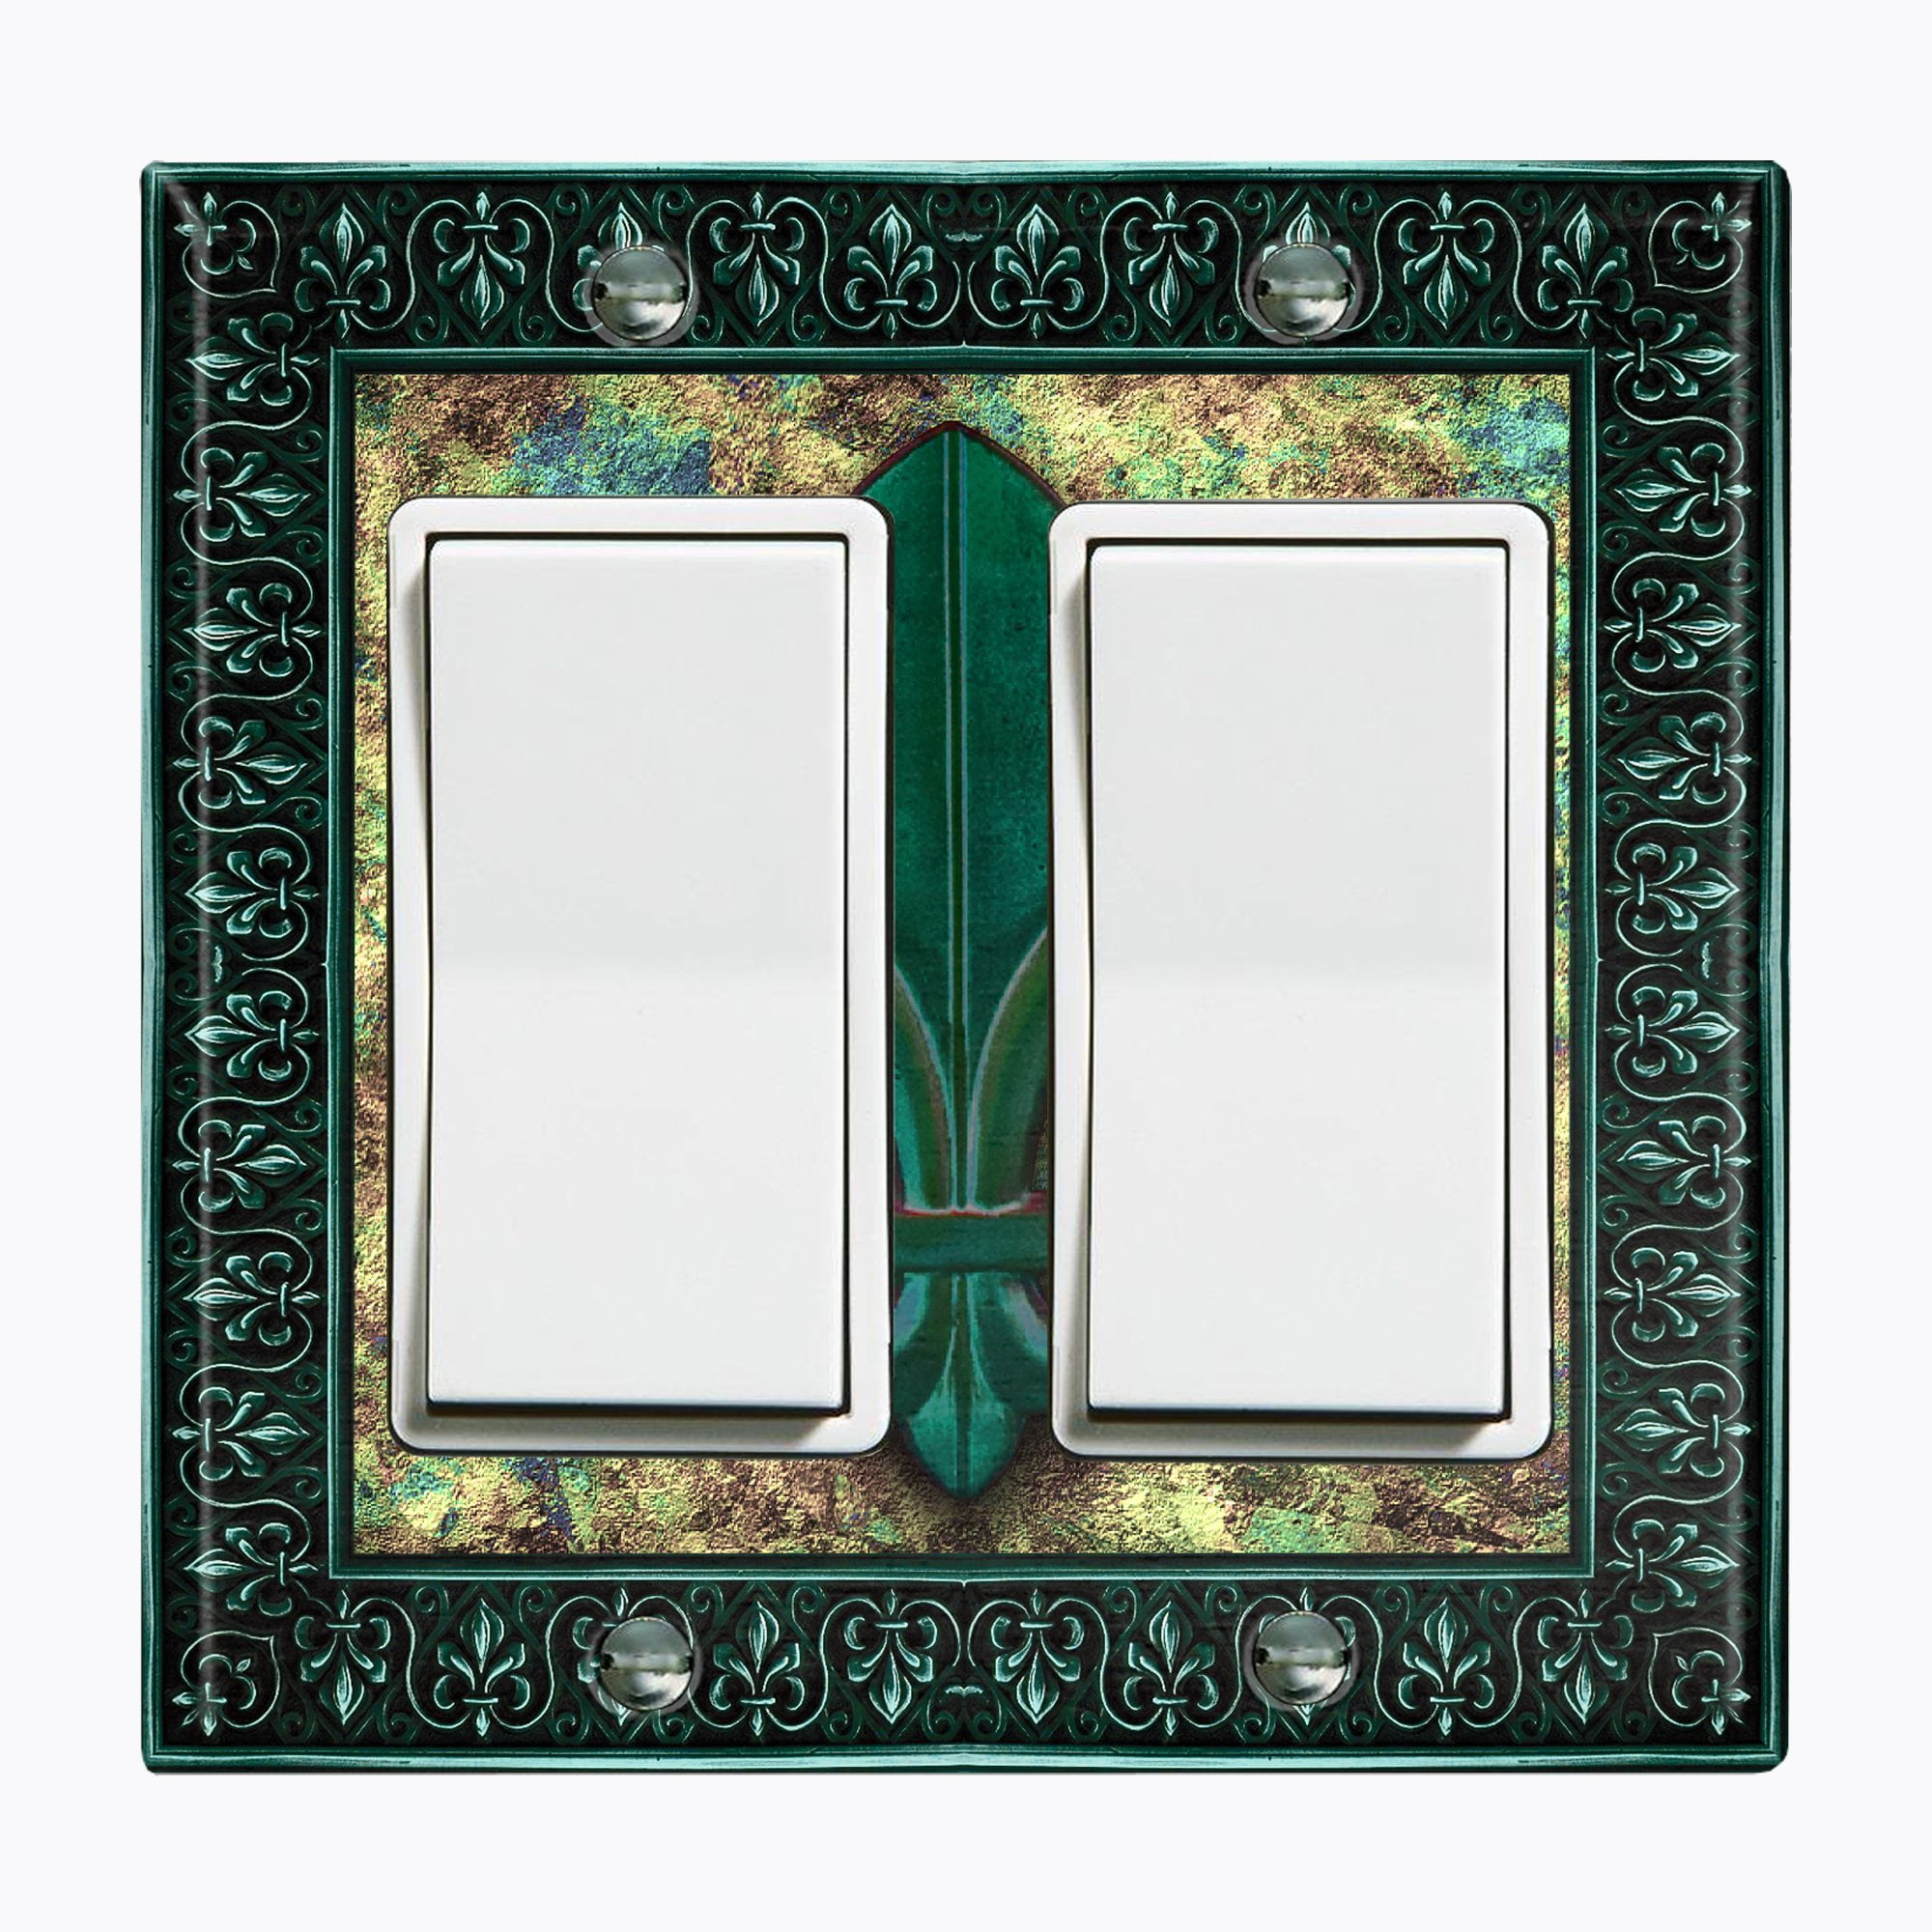 Metal Light Switch Plate Outlet Cover (Image Of Green Stone Fleur De ...